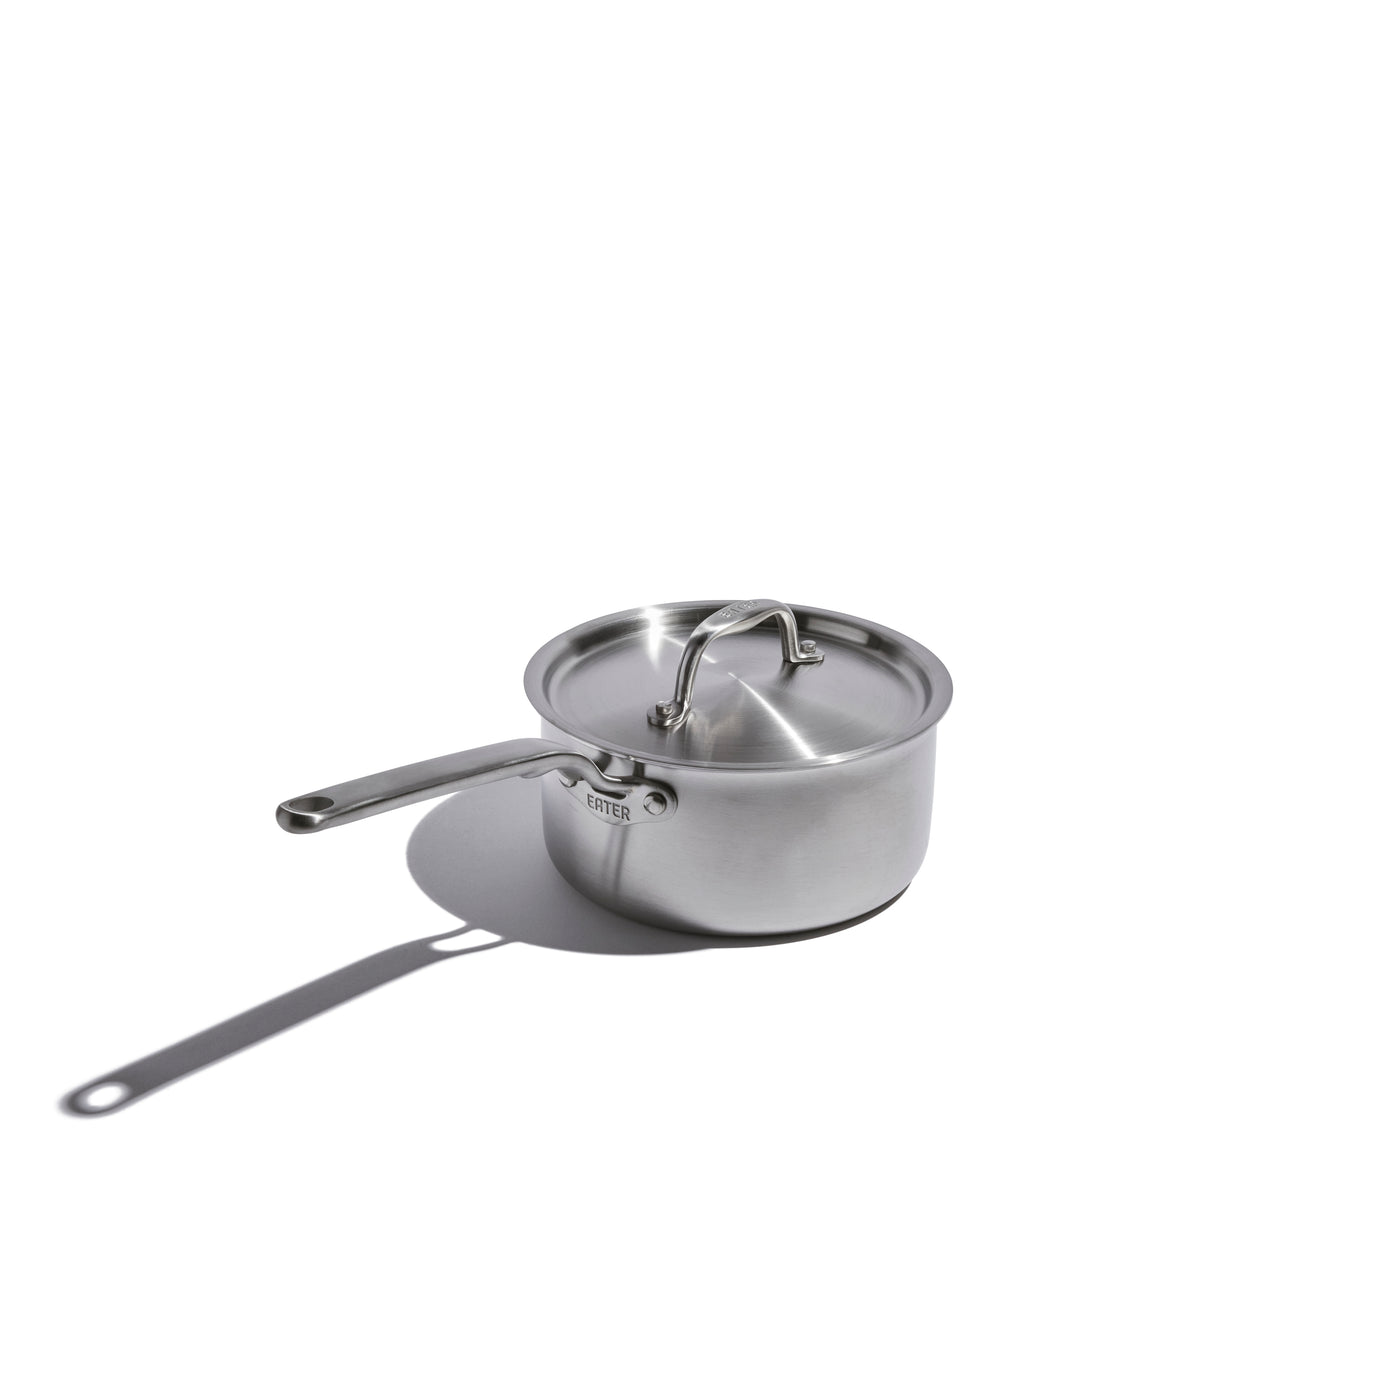 Stainless Steel 3 Quart Saucepan with Cover